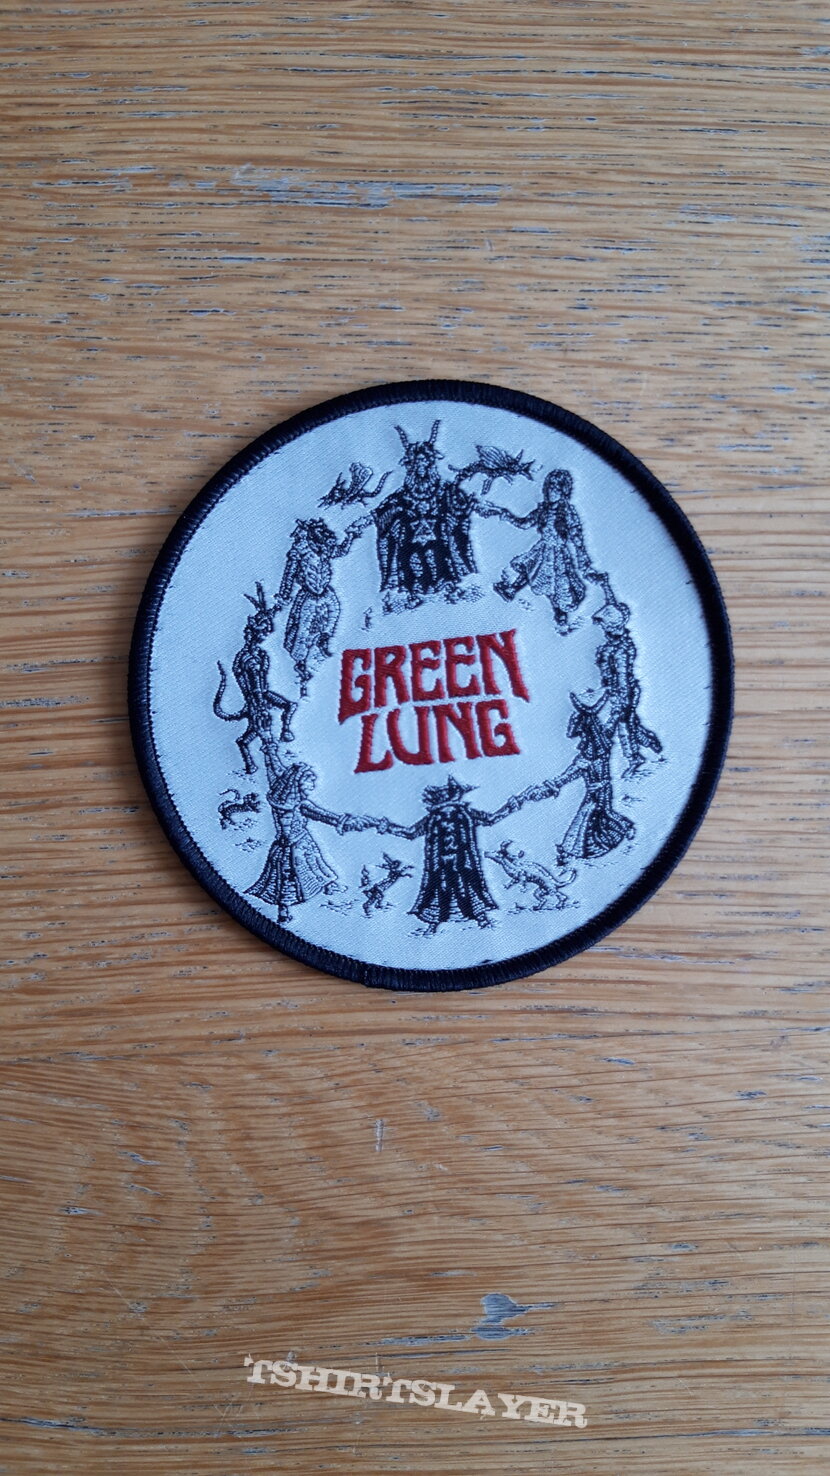 Green Lung Woodland Rites patch